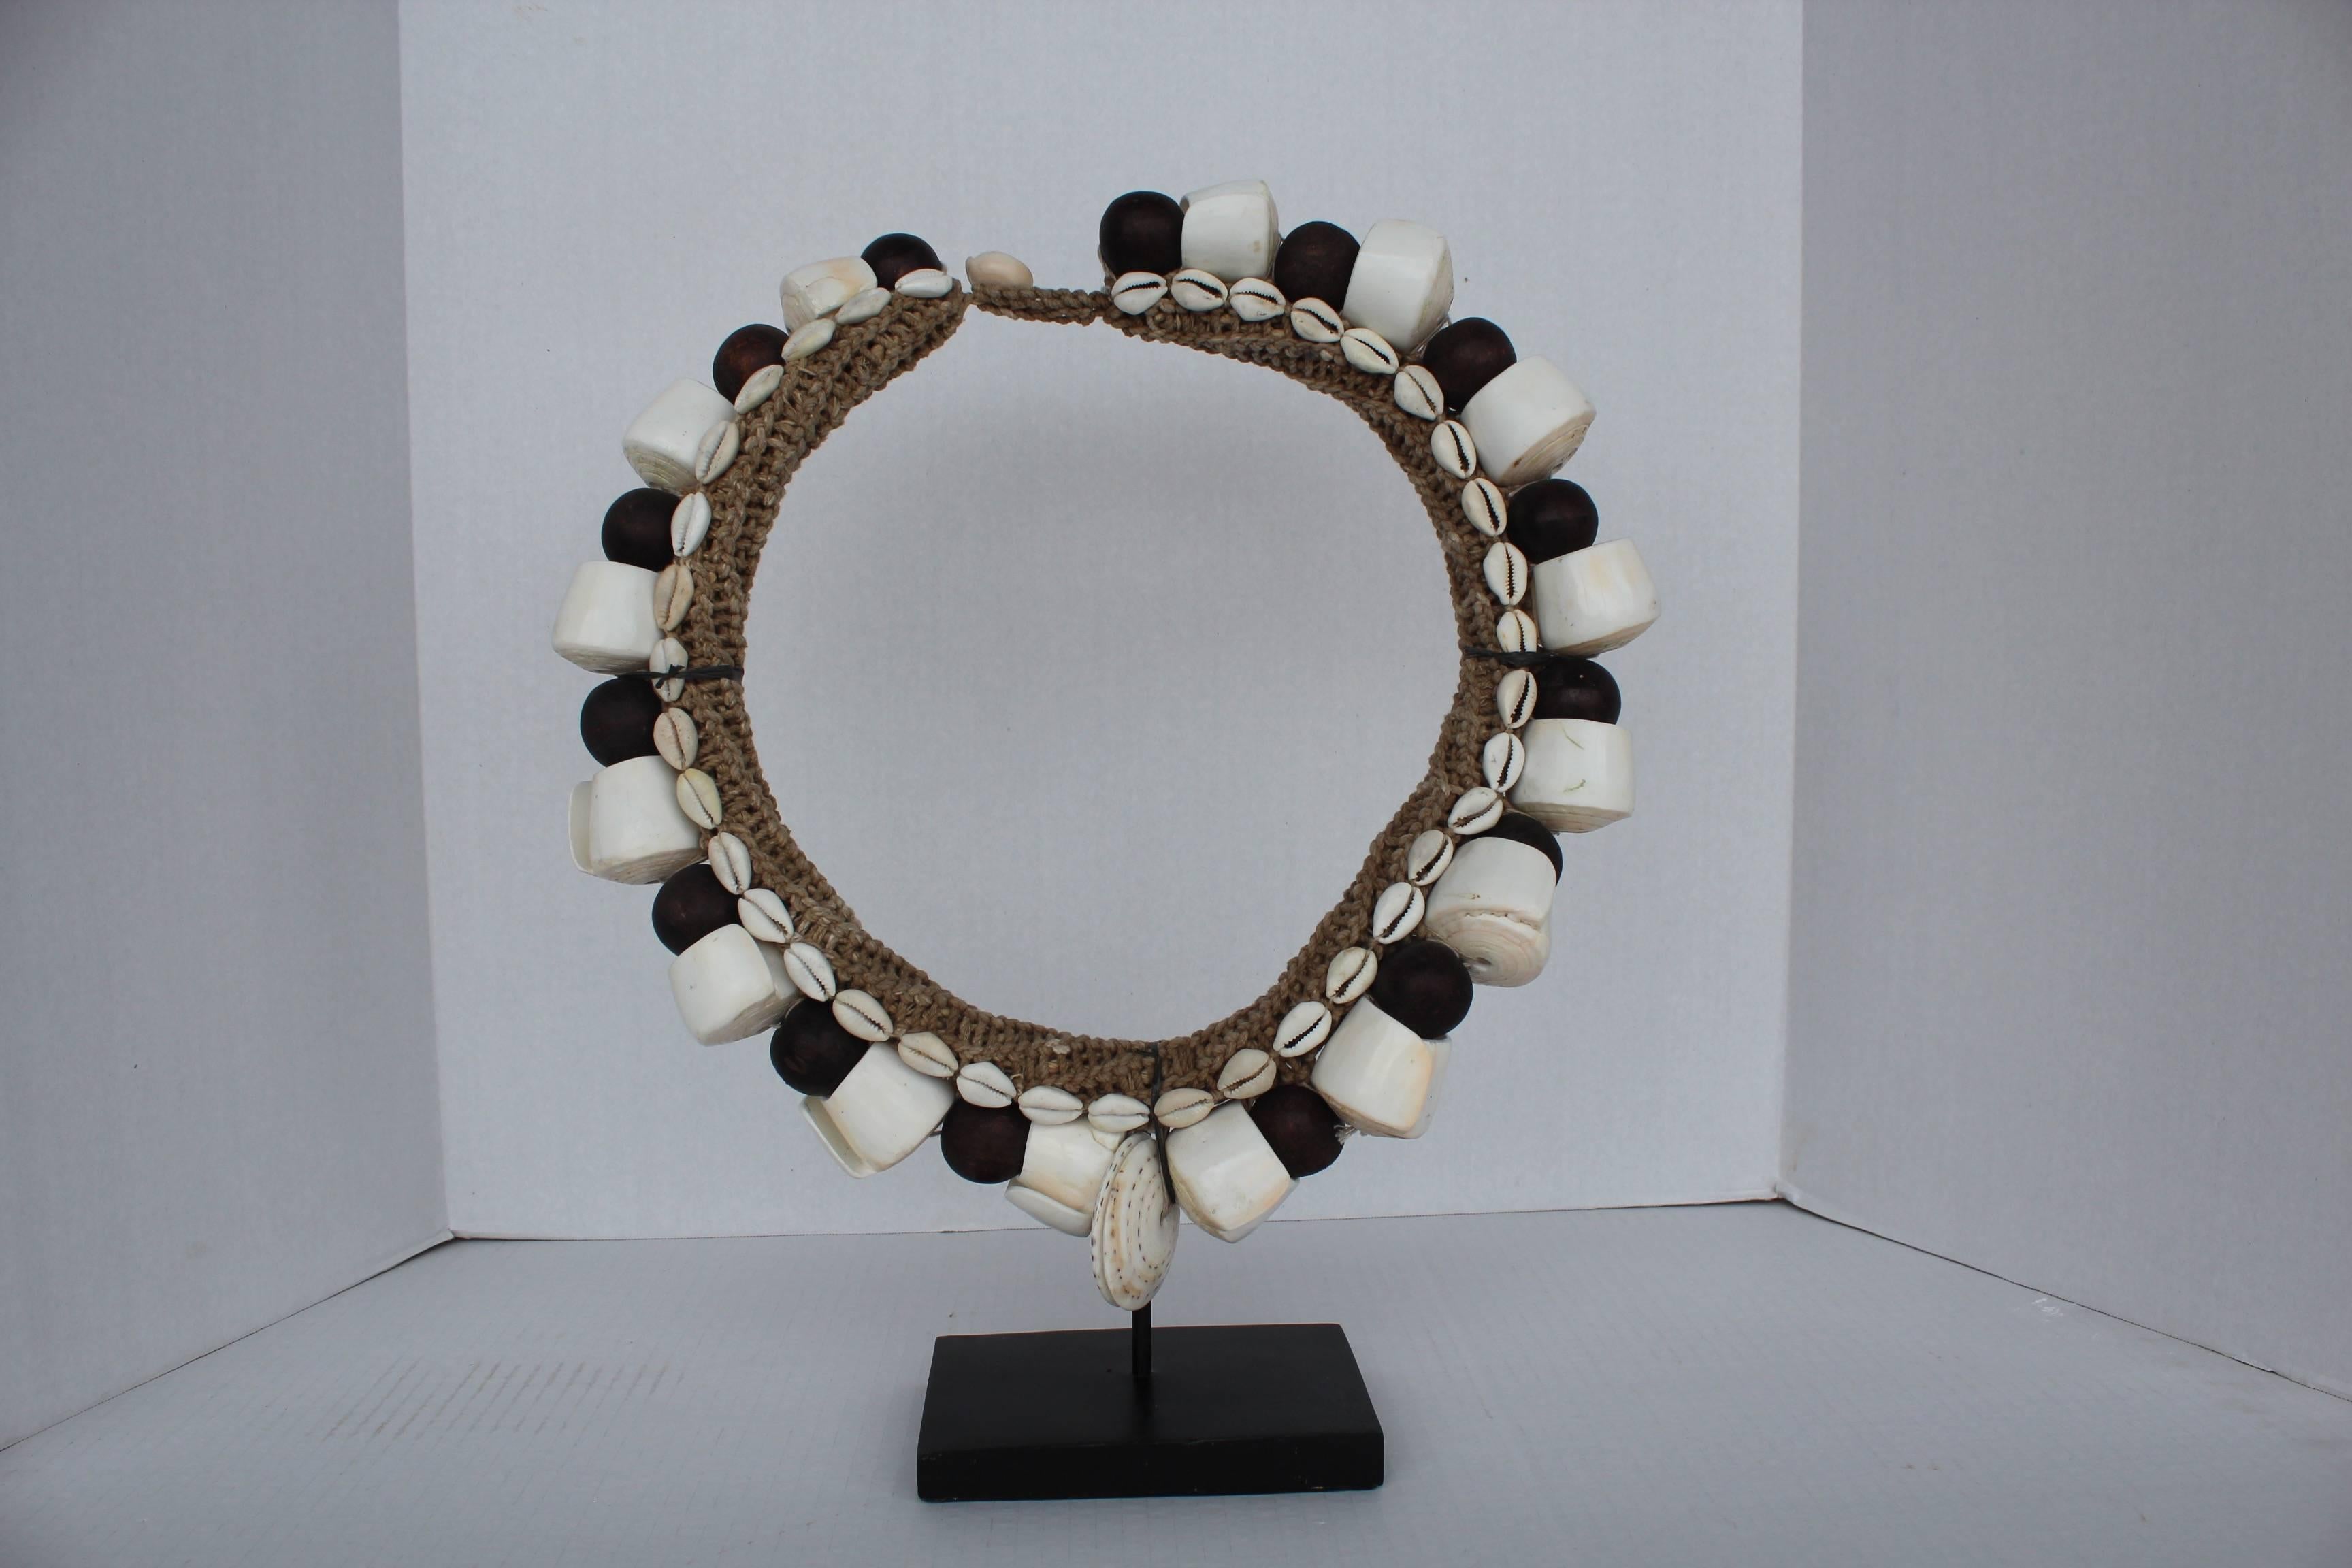 Polished and honed claim shell tribal pendant with handwoven fiber hemp, surrounded by cowrie shells, vintage pearl white curved shells, and coconut carved balls on custom Stand. 

A symbolism for wealth and pride, these necklaces were wrapped and